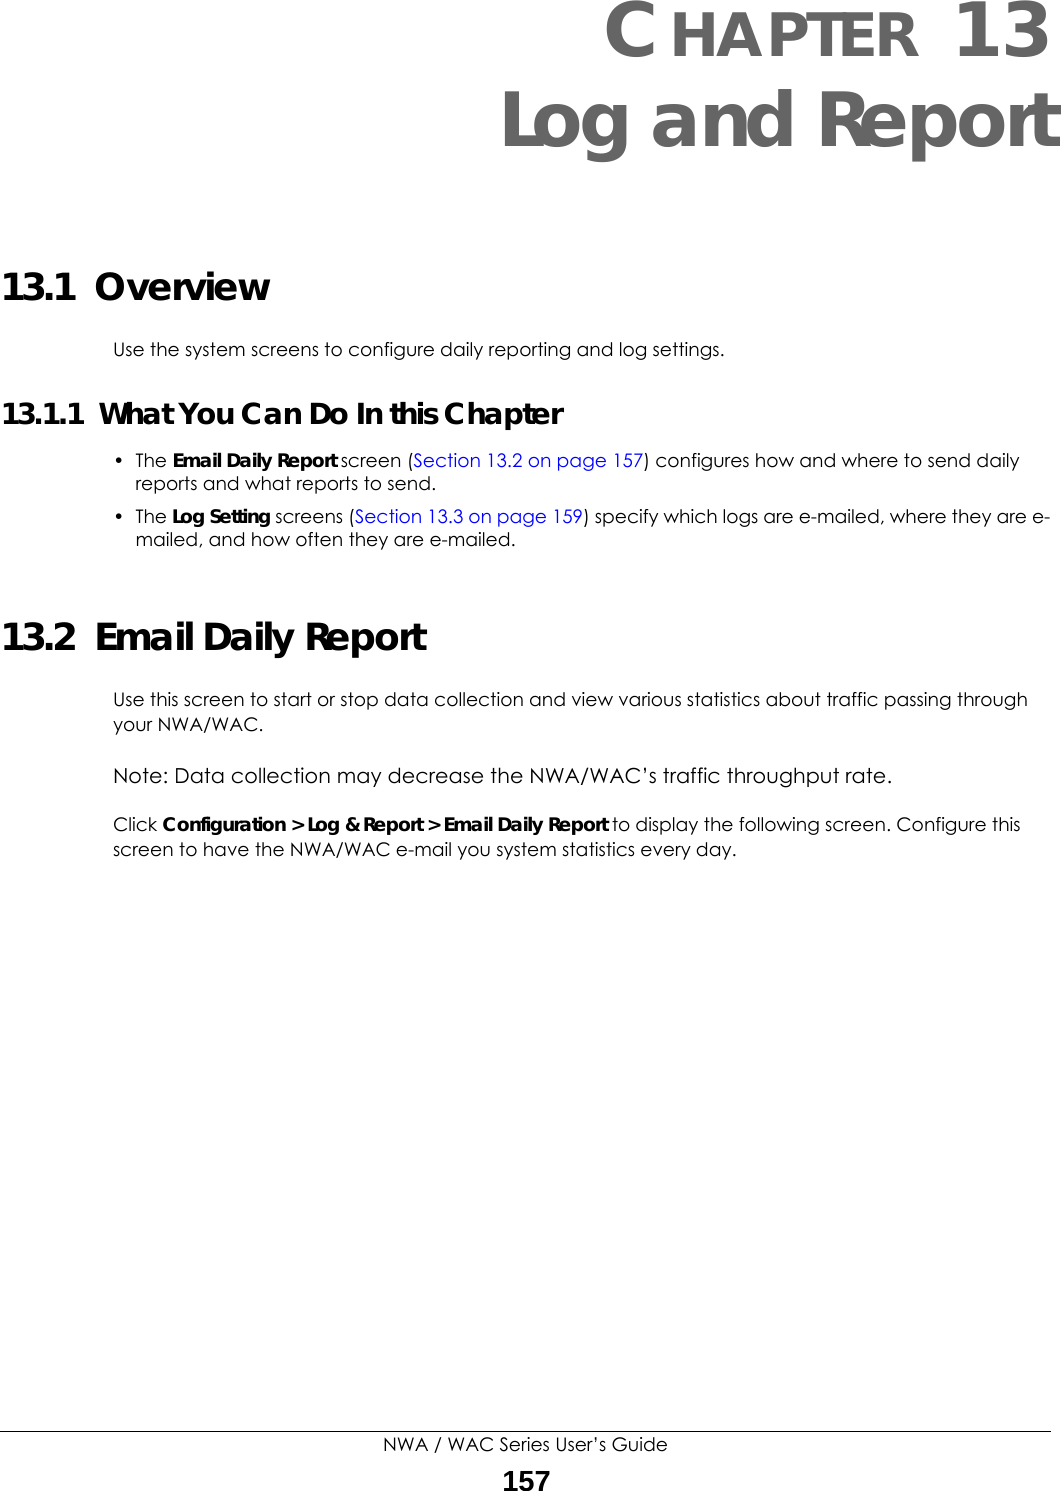 NWA / WAC Series User’s Guide157CHAPTER 13Log and Report13.1  OverviewUse the system screens to configure daily reporting and log settings. 13.1.1  What You Can Do In this Chapter• The Email Daily Report screen (Section 13.2 on page 157) configures how and where to send daily reports and what reports to send.• The Log Setting screens (Section 13.3 on page 159) specify which logs are e-mailed, where they are e-mailed, and how often they are e-mailed.13.2  Email Daily ReportUse this screen to start or stop data collection and view various statistics about traffic passing through your NWA/WAC. Note: Data collection may decrease the NWA/WAC’s traffic throughput rate.Click Configuration &gt; Log &amp; Report &gt; Email Daily Report to display the following screen. Configure this screen to have the NWA/WAC e-mail you system statistics every day. 